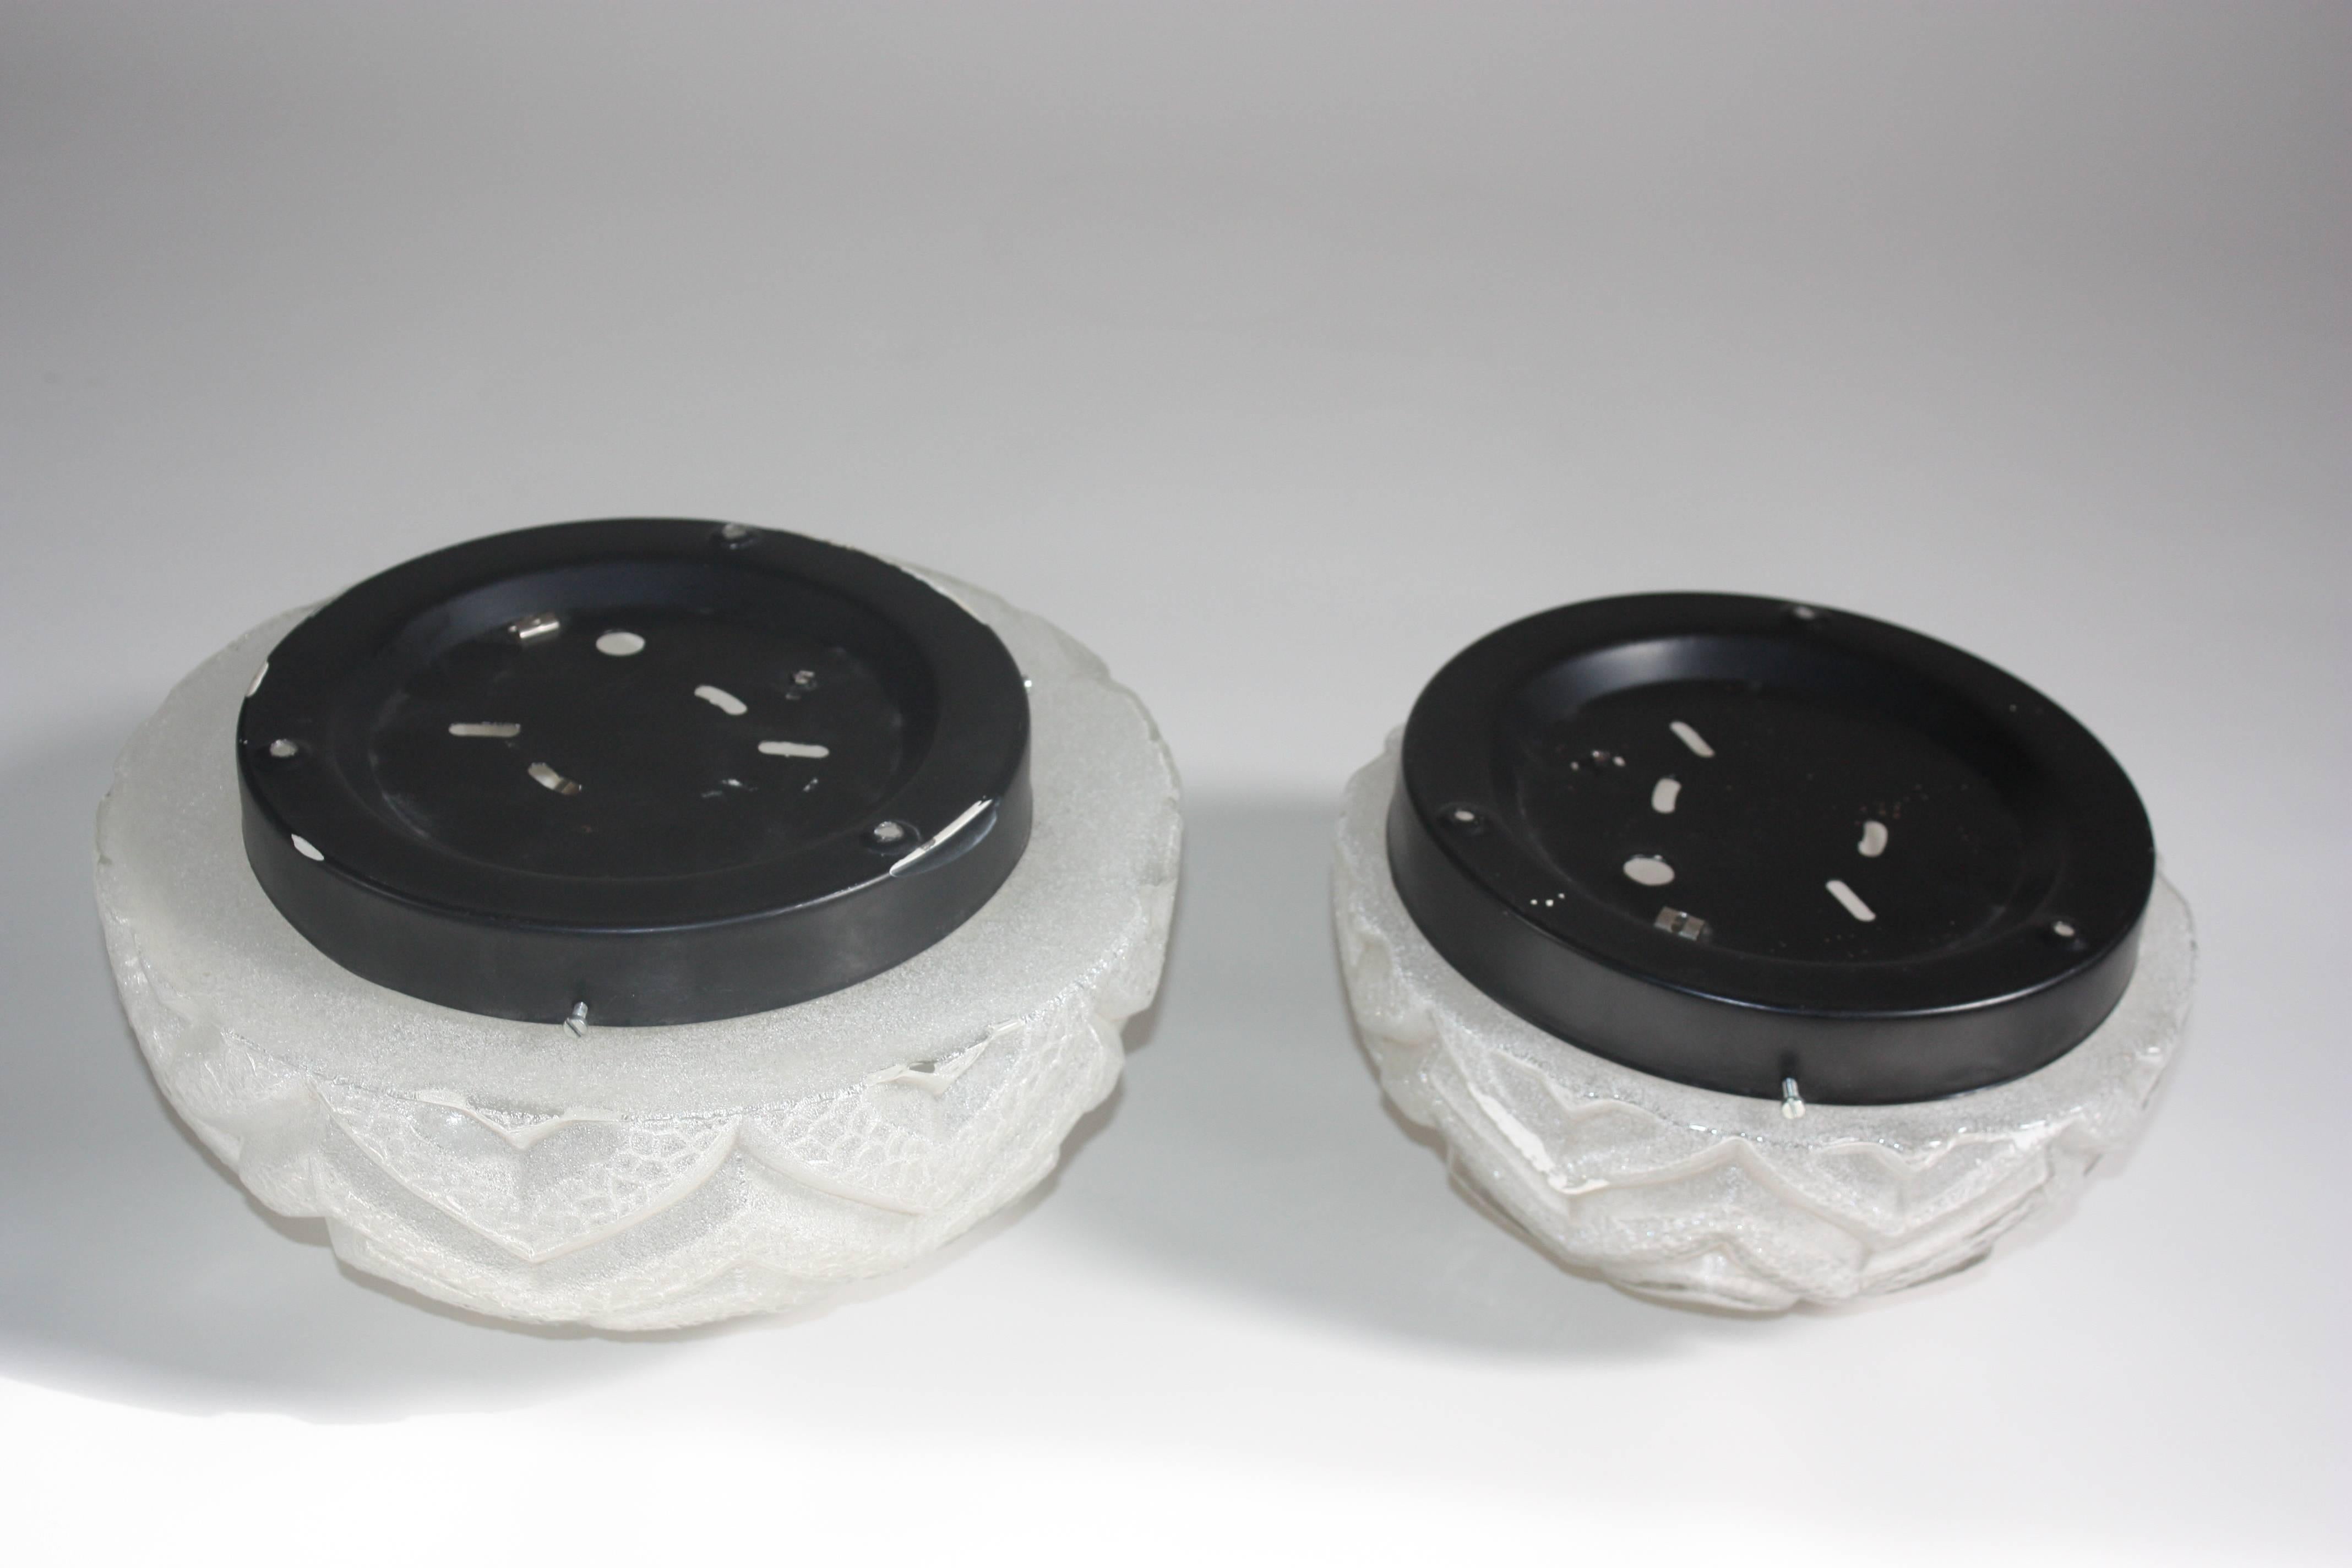 Pair of Mid-Century flush mounts in two sizes.
Textured glass and black painted metal frame.
Germany, circa 1960s.
Very good condition.
Socket: E 27 standard 

Measures: 9.8 